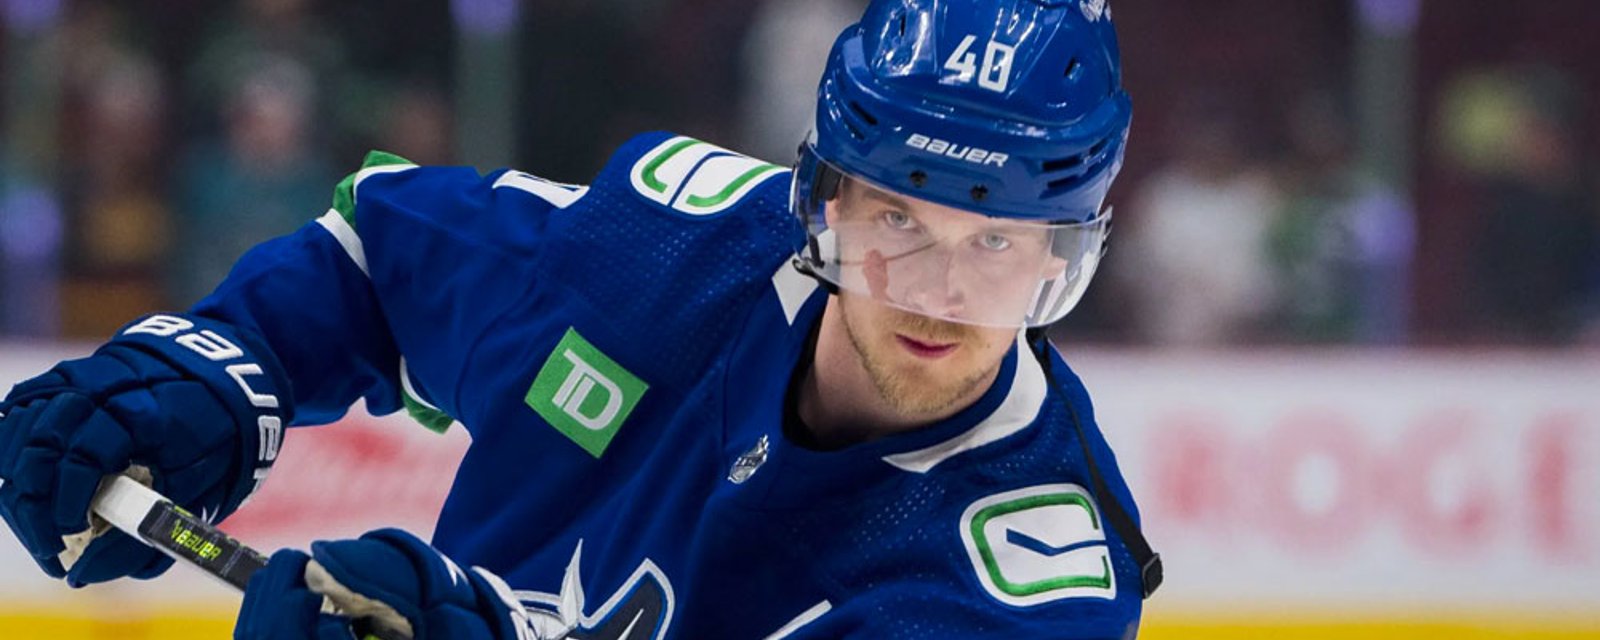 Reports that Elias Pettersson is “closing the door” on the Canucks